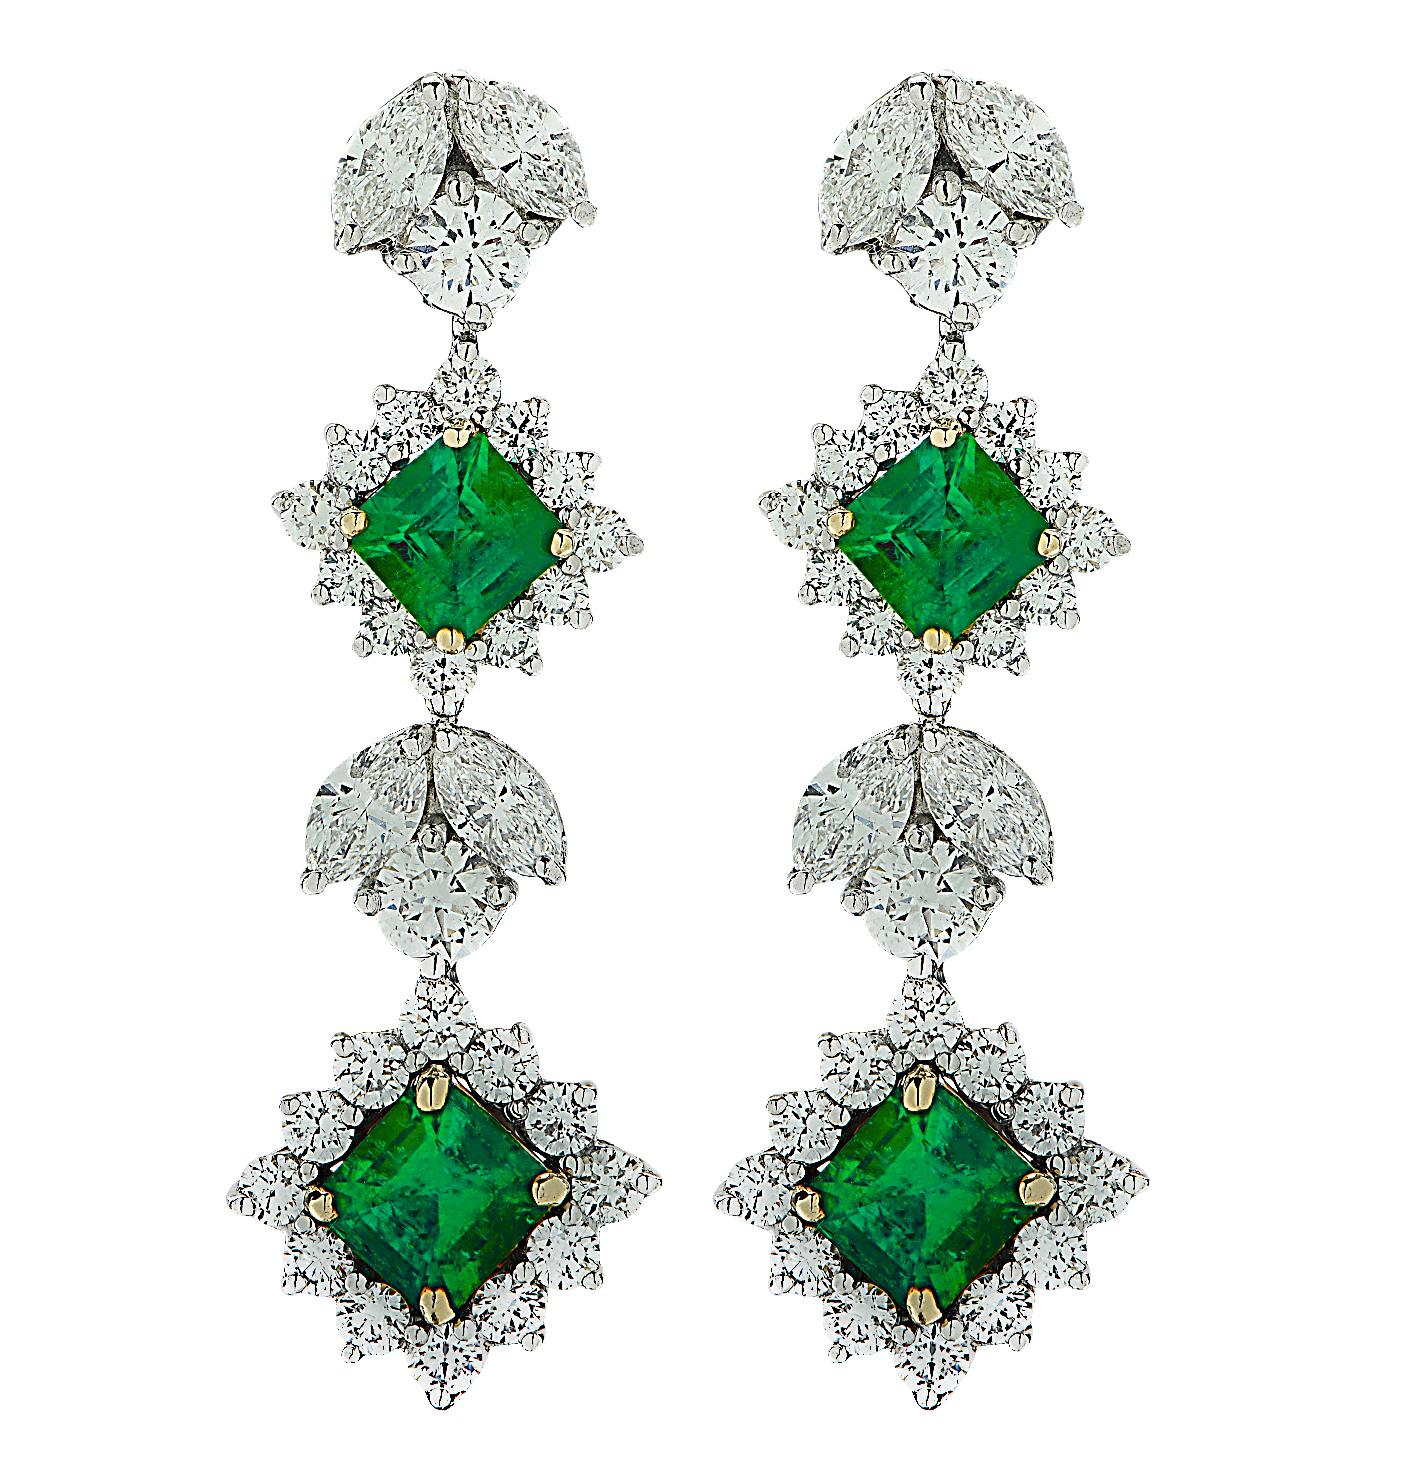 Spectacular Emerald and Diamond dangle earrings crafted in Platinum and 18 karat yellow gold, showcasing 4 square emerald cut green emeralds weighing approximately 2.52 carats total, and 60 mixed round brilliant cut and marquise cut diamonds